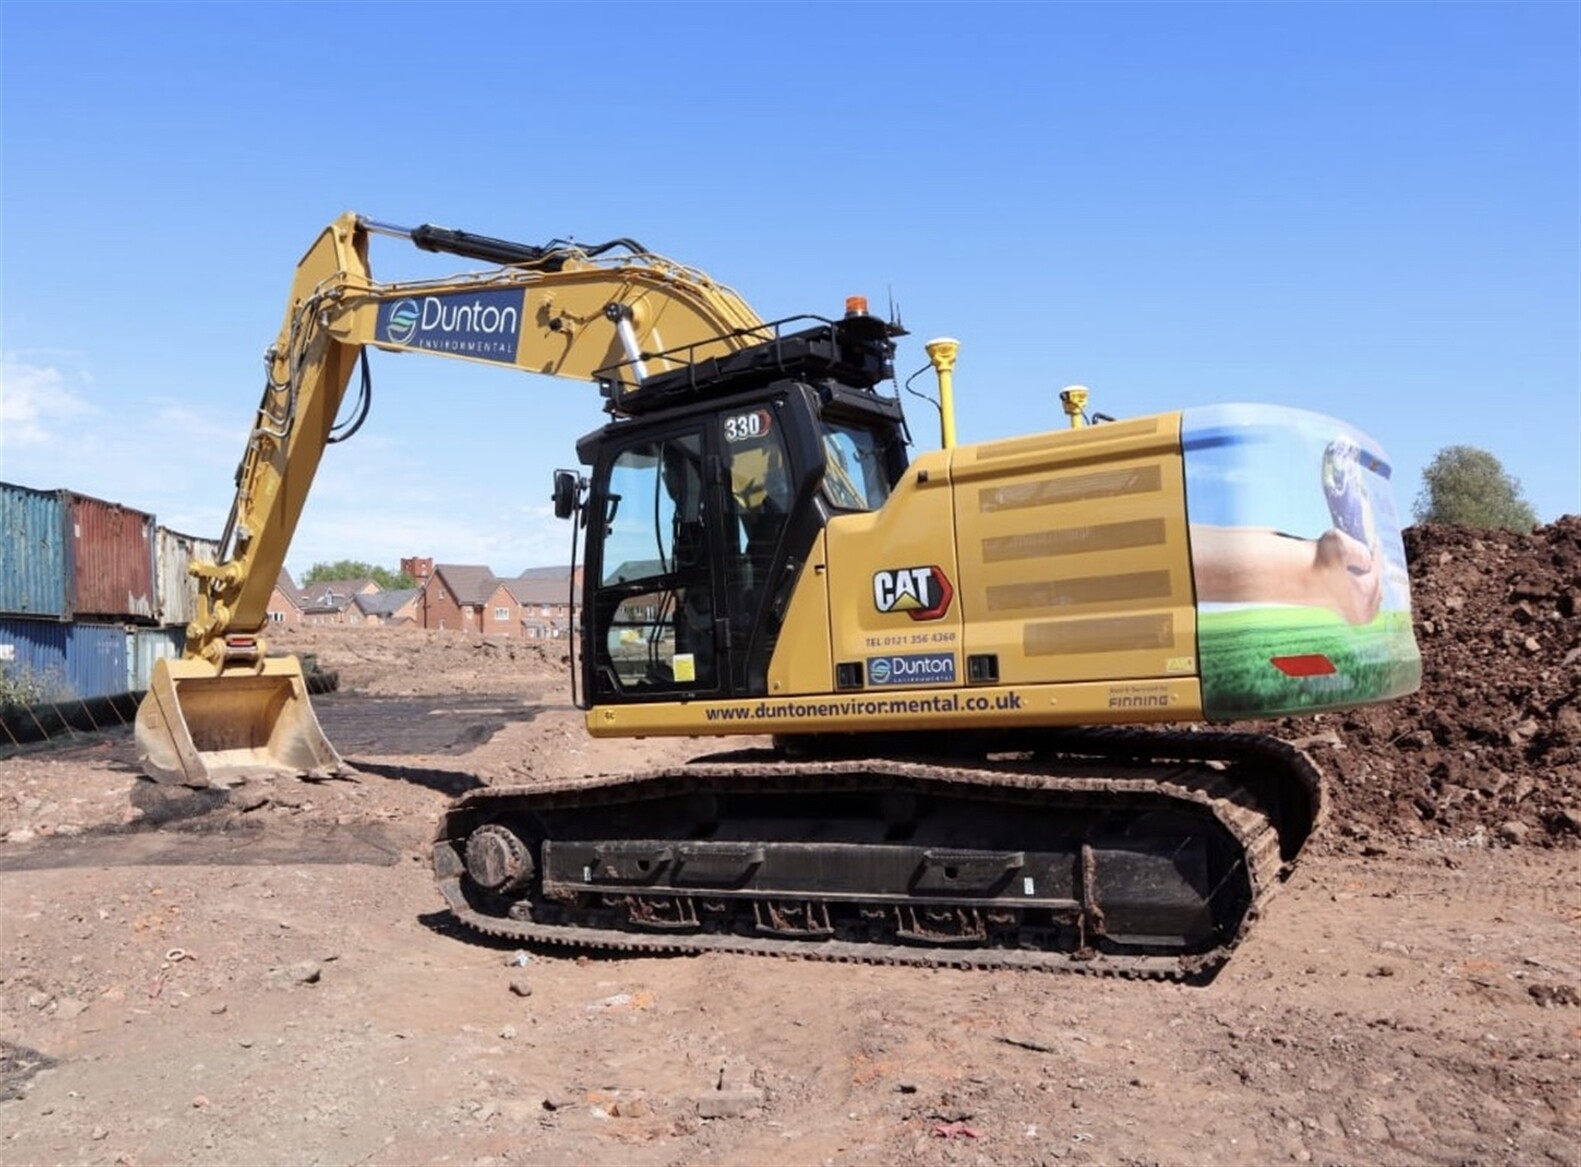 Dunton Environmental invest in new Cat Excavator with proceeds from Ritchie Bros Auction